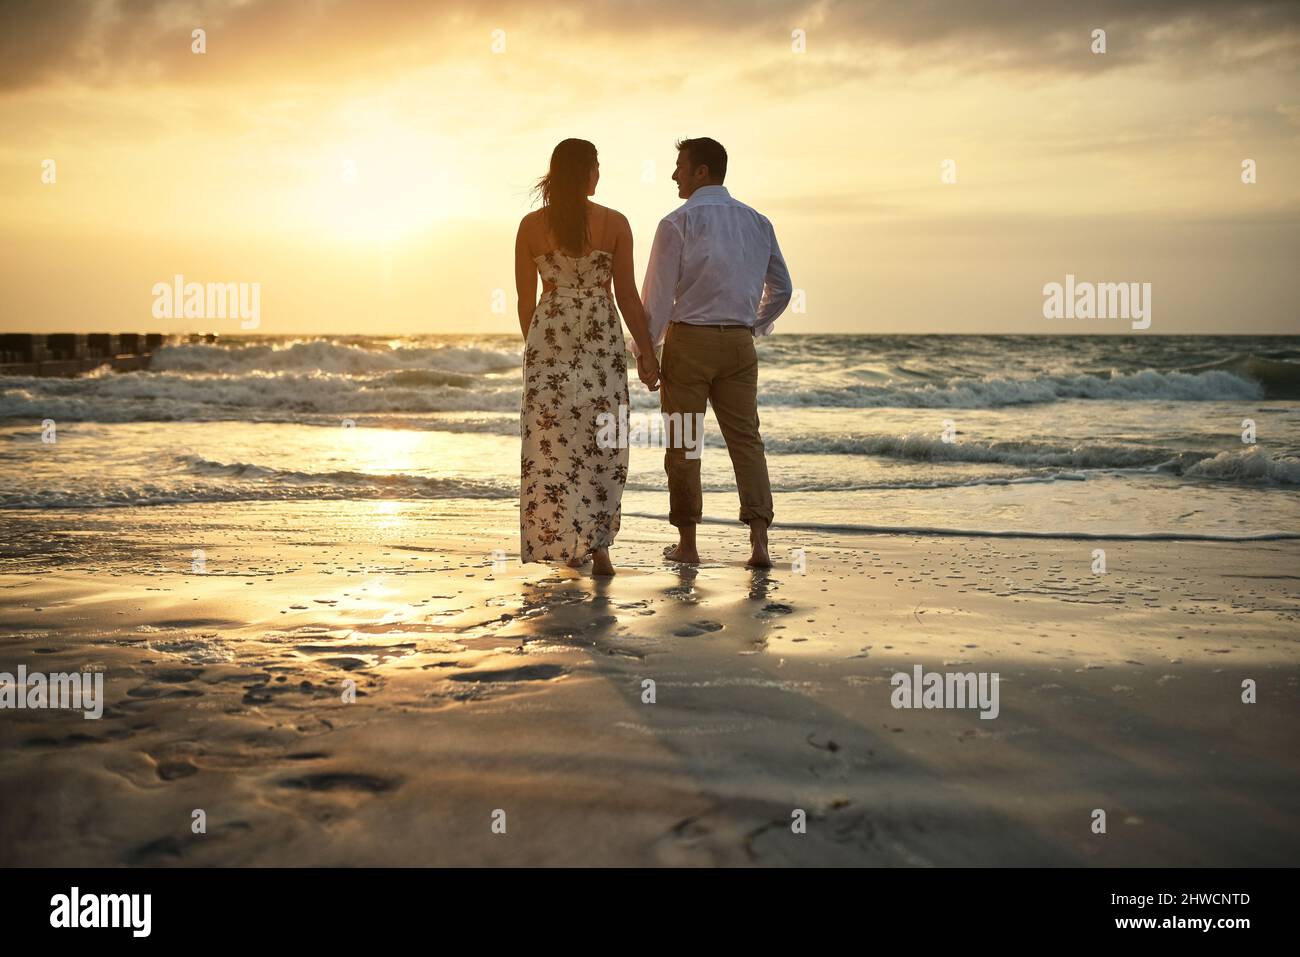 Side view of young romantic wedding couple holding face to face outdoors  Stock Photo - Alamy